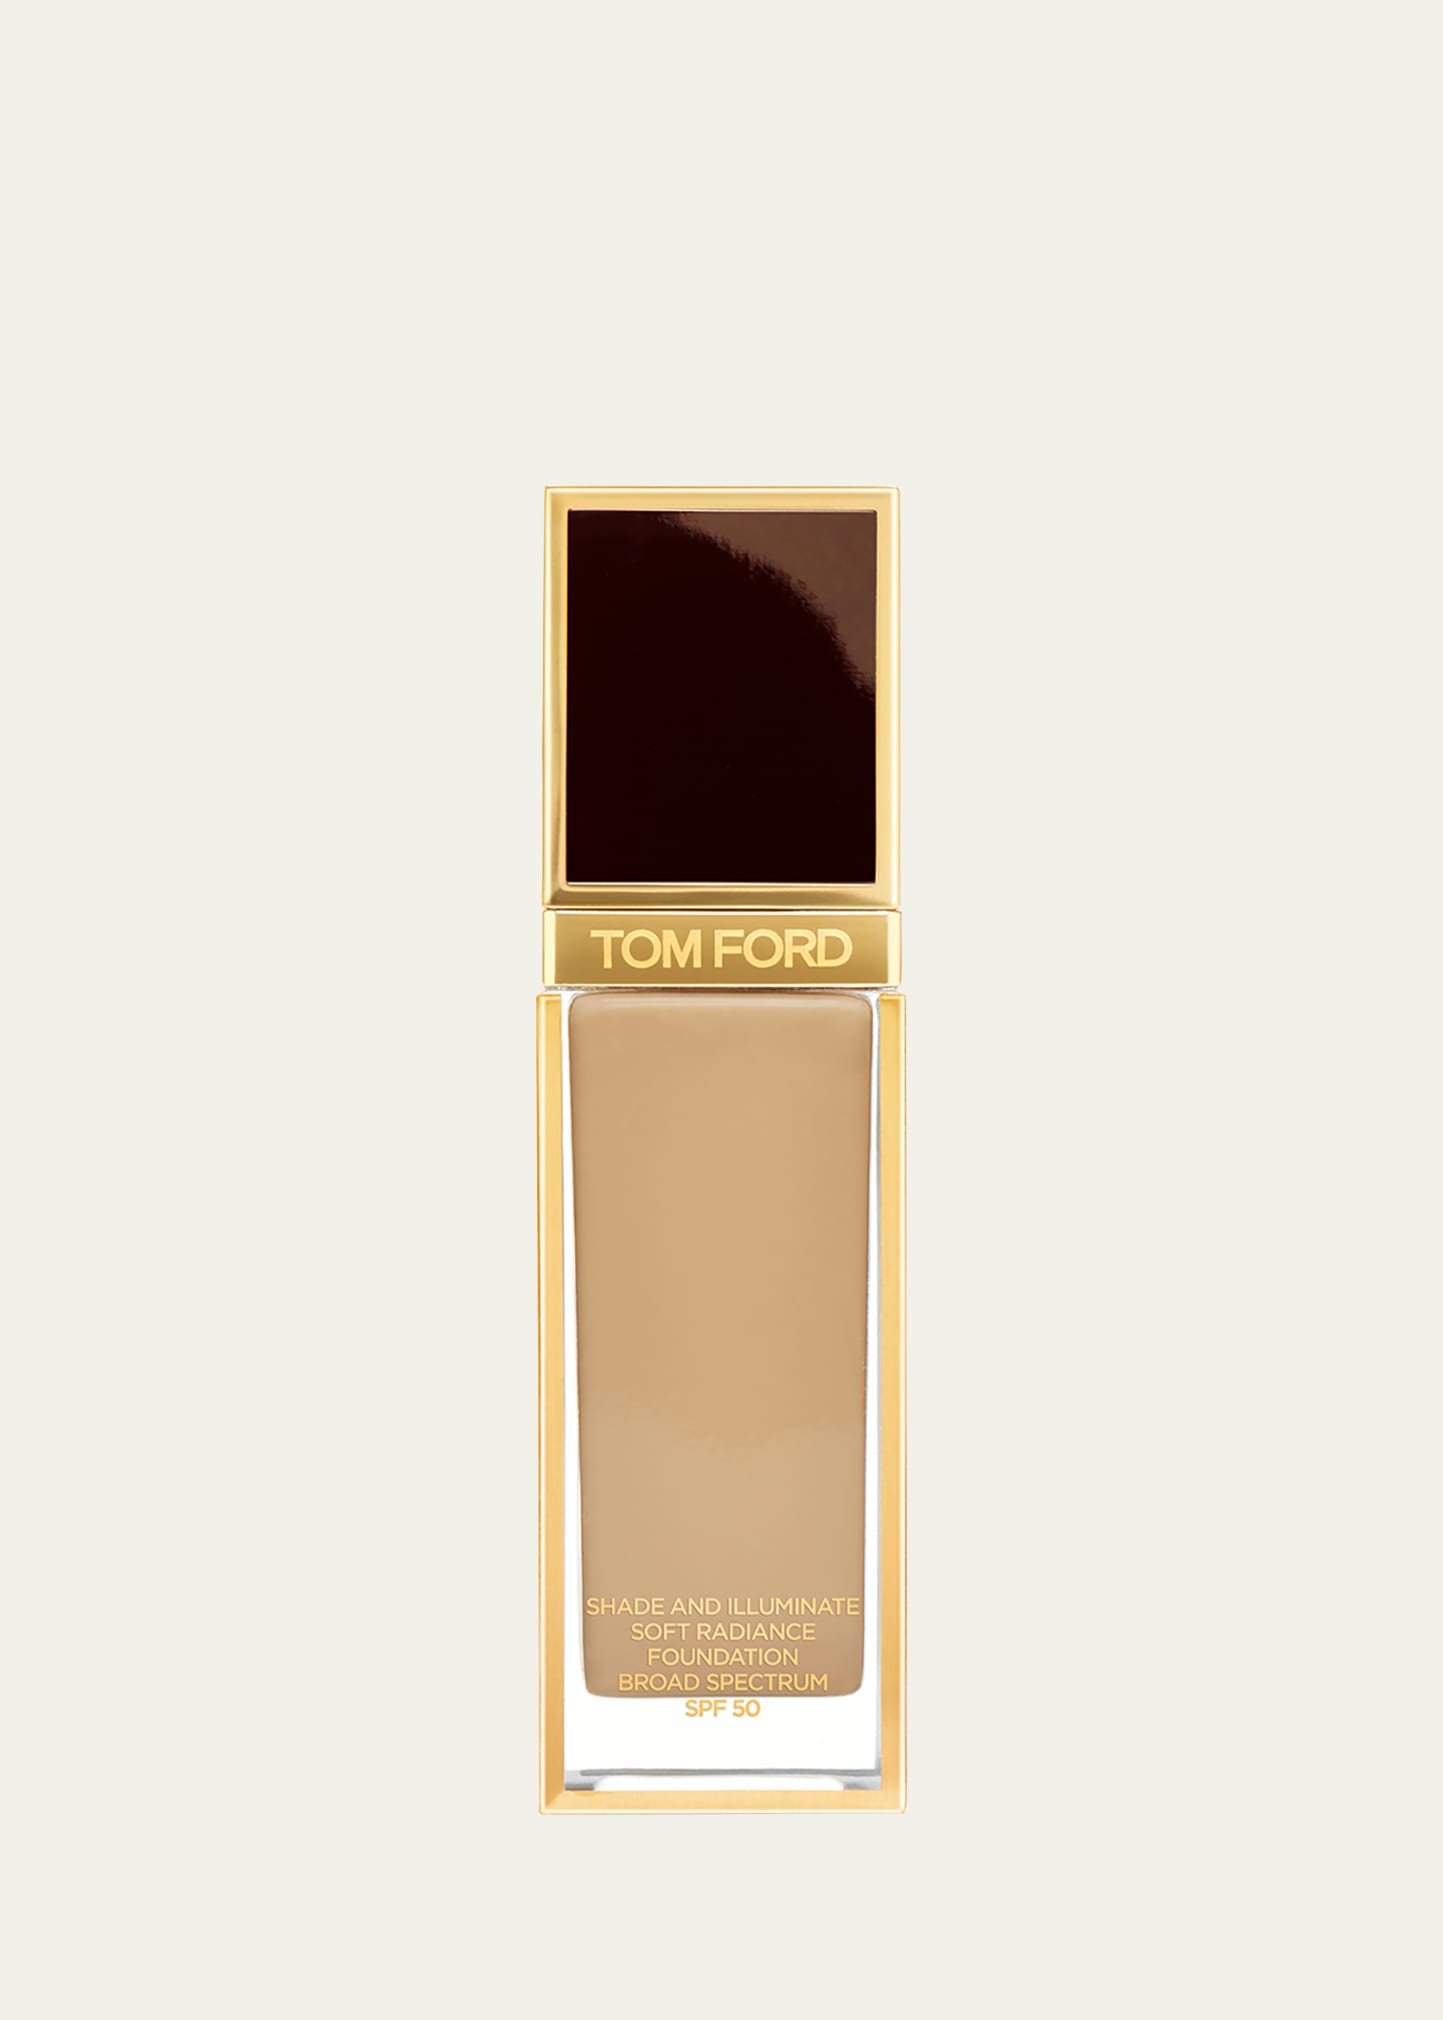 Tom Ford 1 Oz. Shade And Illuminate Soft Radiance Foundation Spf 50 In 7.2 Sepia